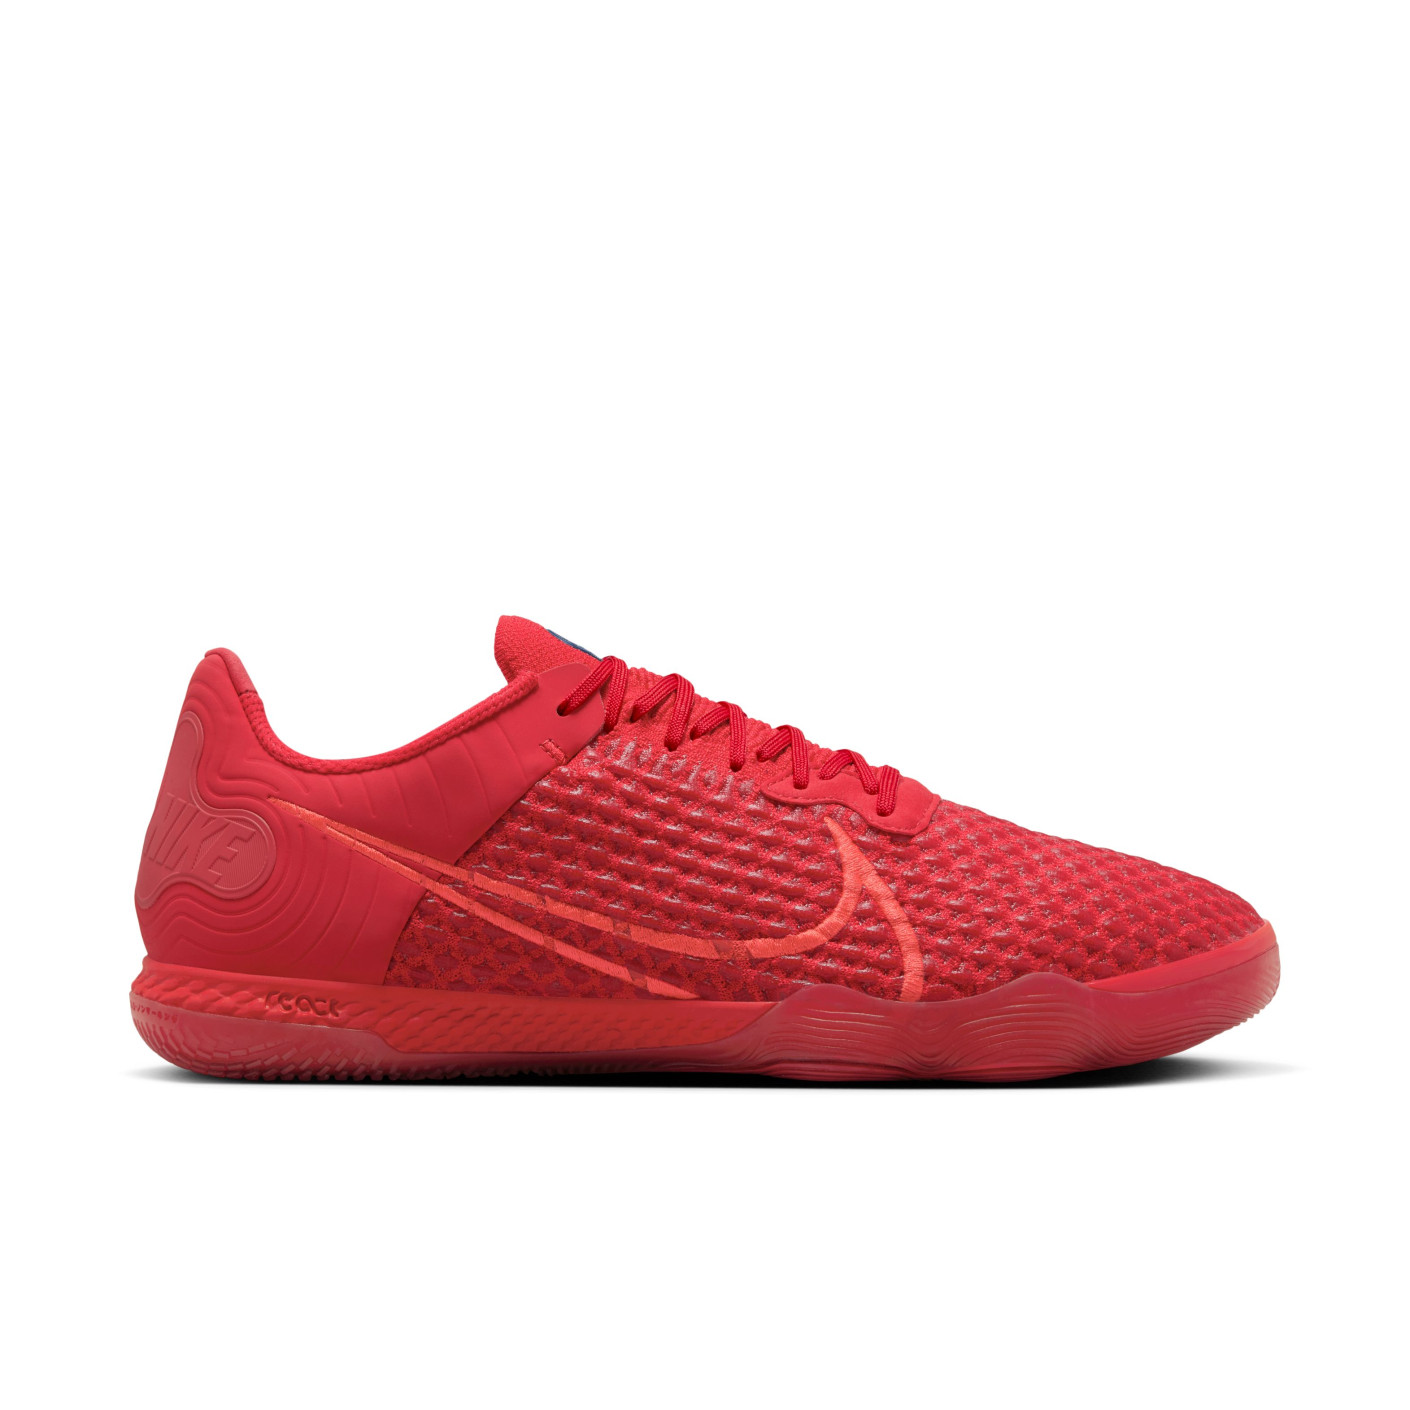 Nike React Gato (IN) Indoor Football Shoes Red Dark Blue